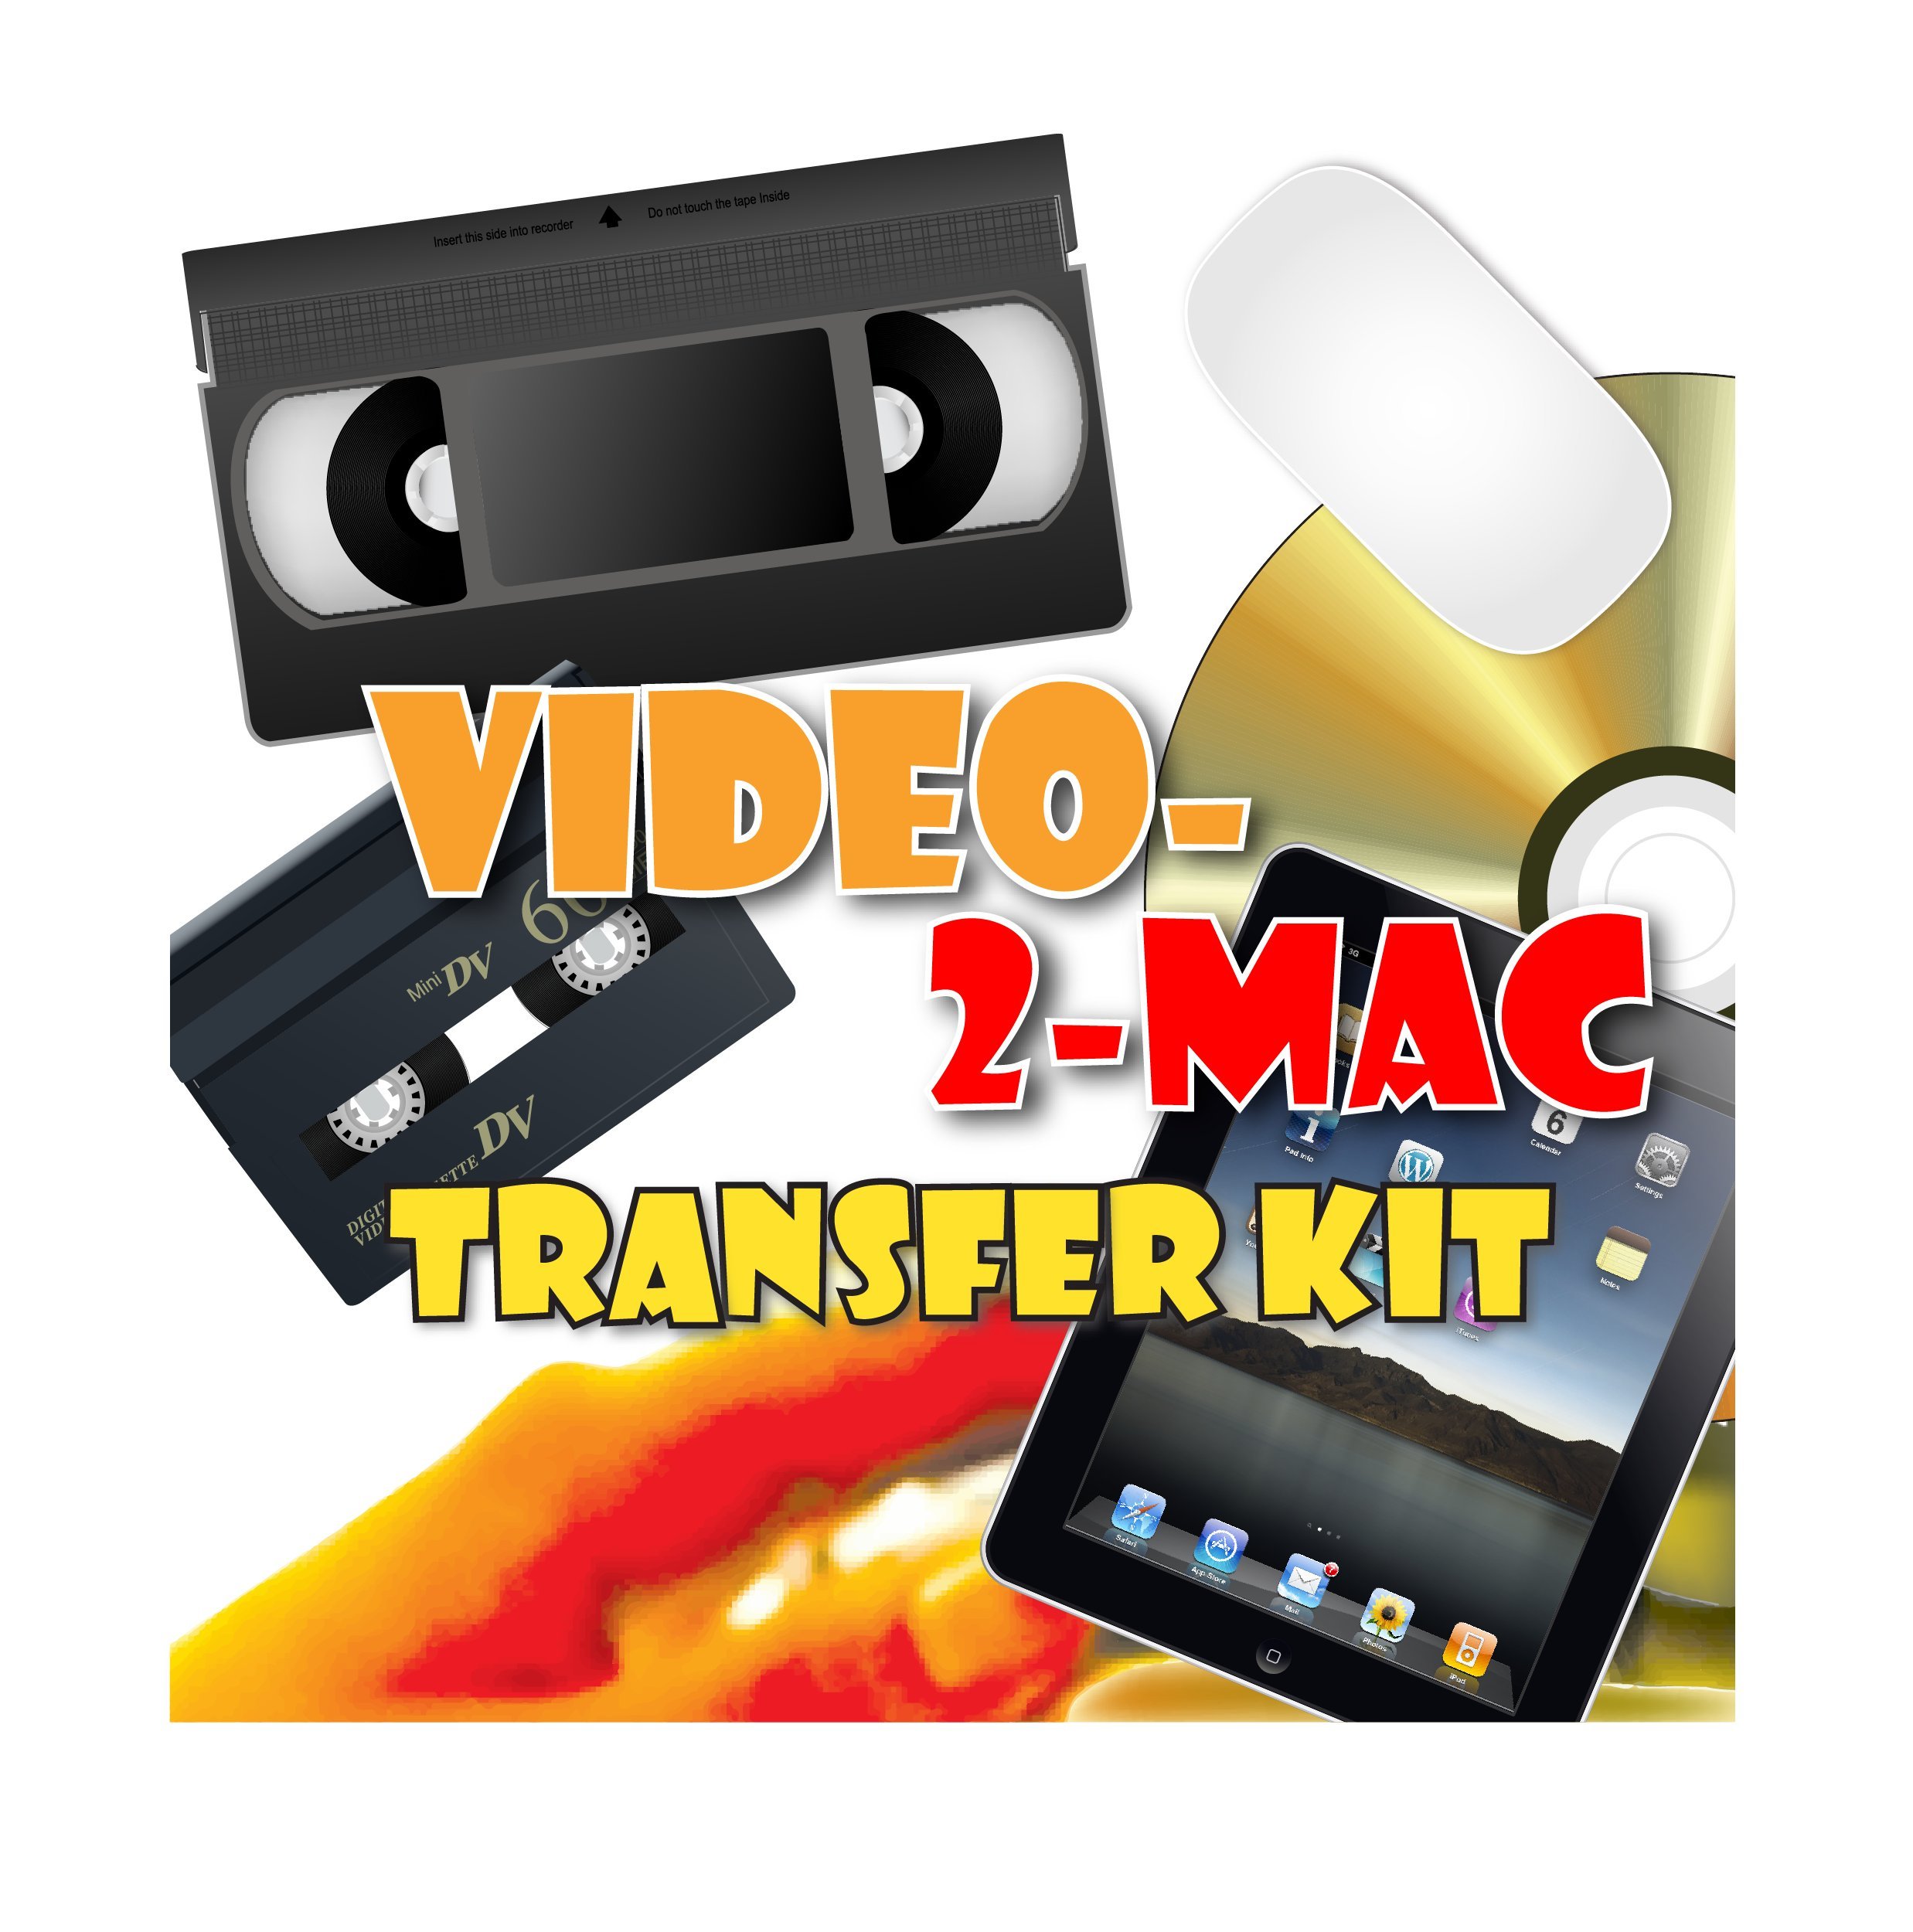 VHS and Camcorder Video Capture Kit. For Mac OSX. Works with Mojave (10.14), High Sierra (10.13), Sierra (10.12), El Capitan (10.11), Yosemite (10.10), Mavericks (10.9.5), Mountain Lion (10.8.5), Lion (10.7.5) and Snow Leopard (10.6.8). Includes USB capture hardware, leads and capture software. Links your existing VCR or Camcorder to your Apple Mac. Copy, Convert, Transfer VHS